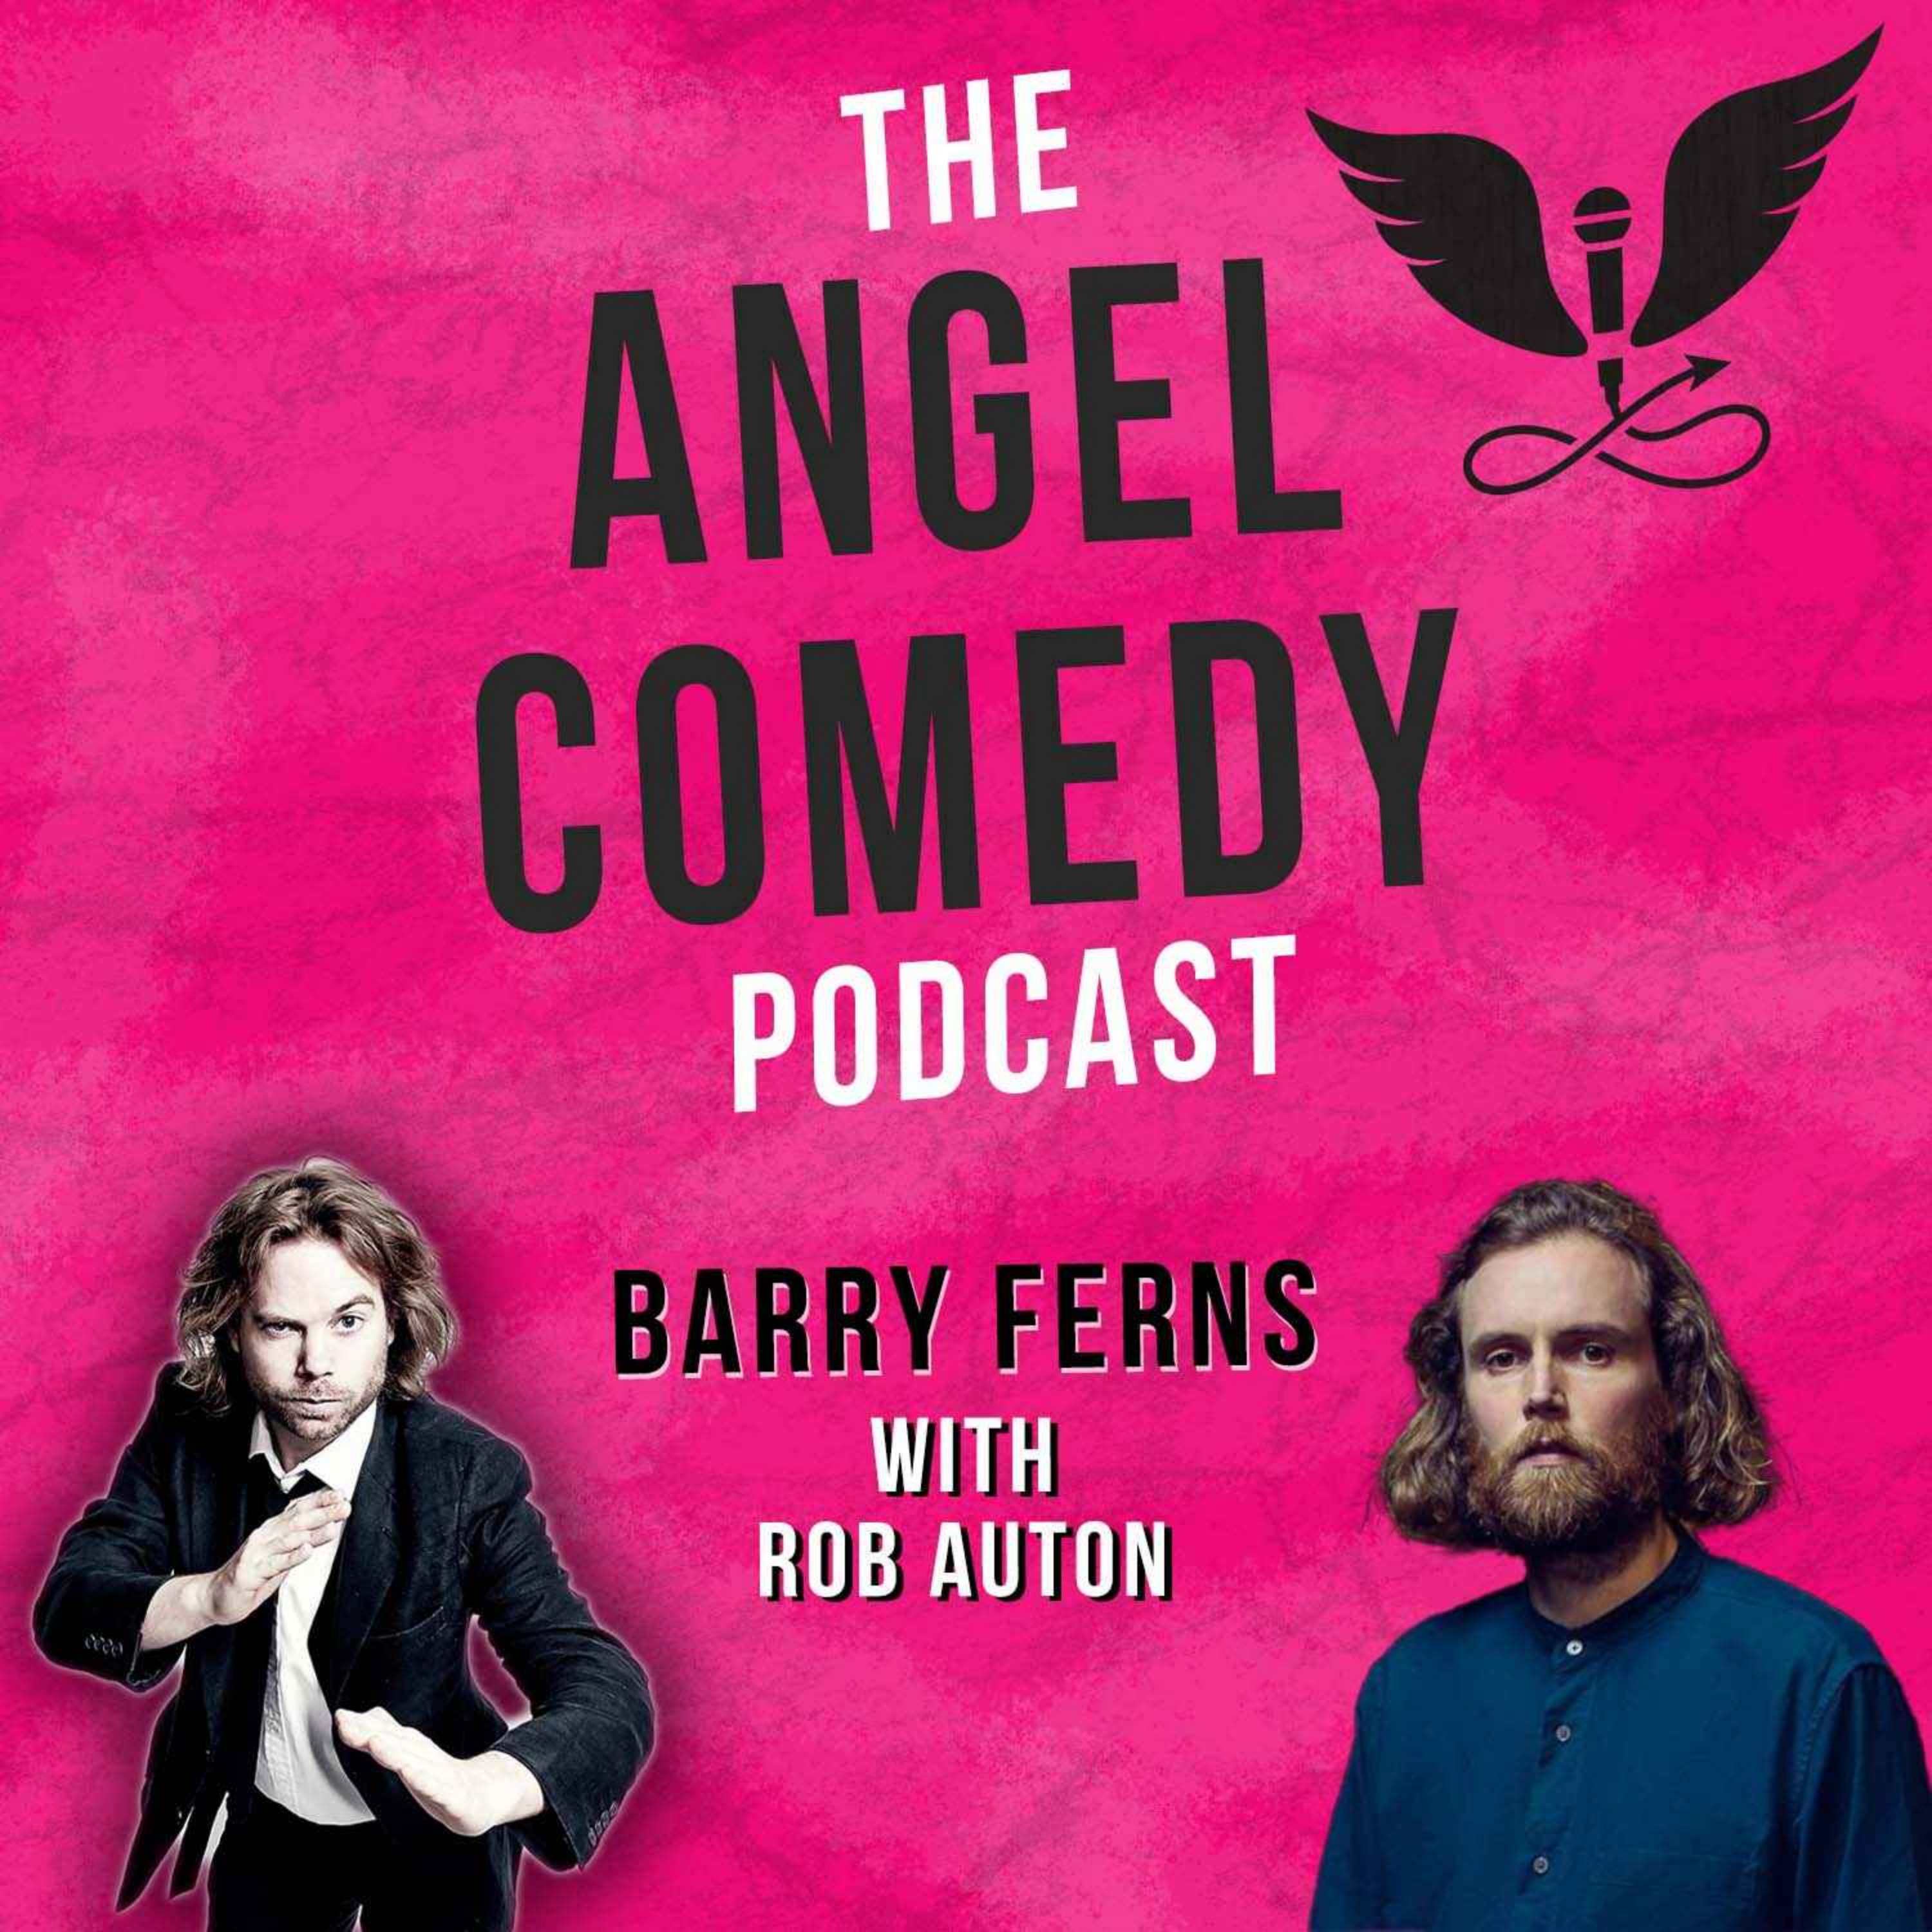 The Angel Comedy Podcast with Rob Auton